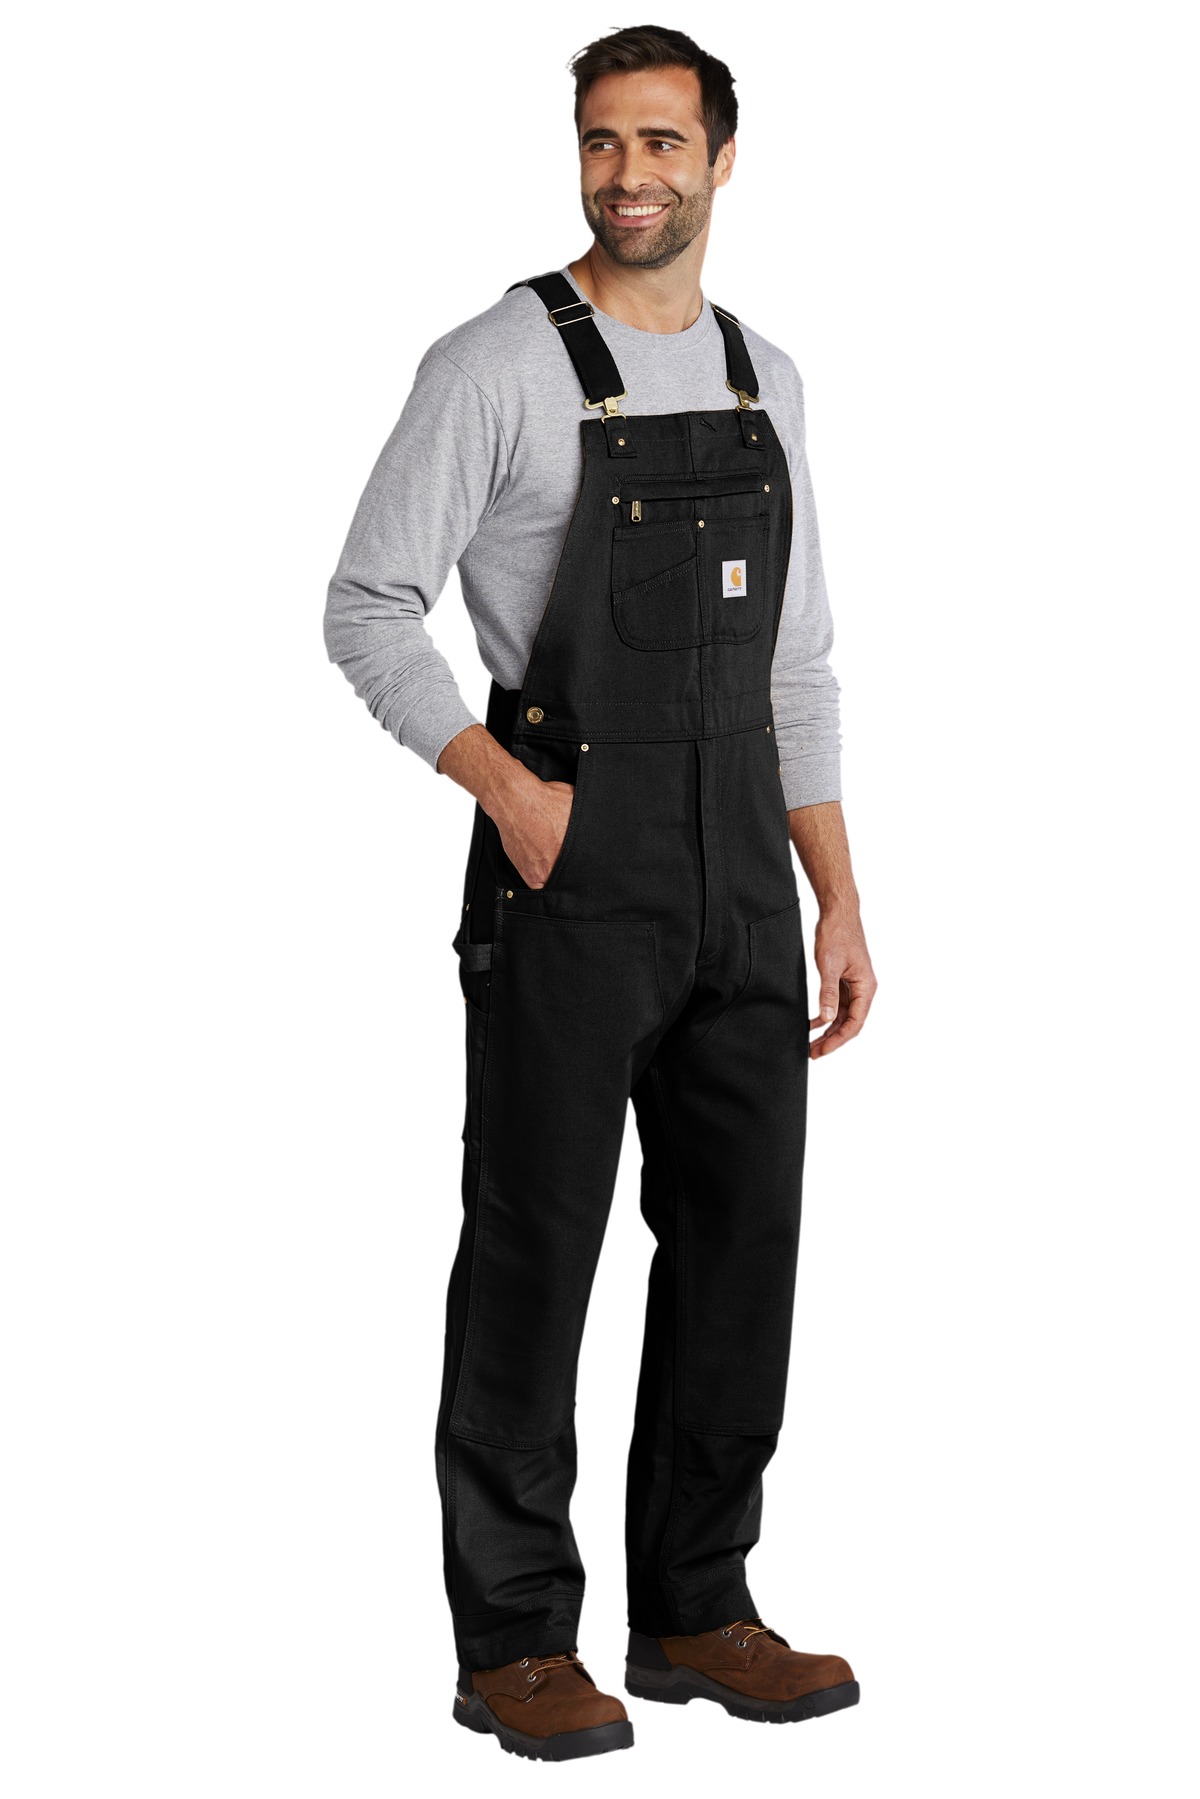 Carhartt Duck Unlined Bib Overalls CTR01 | Blank Apparel by ZOME